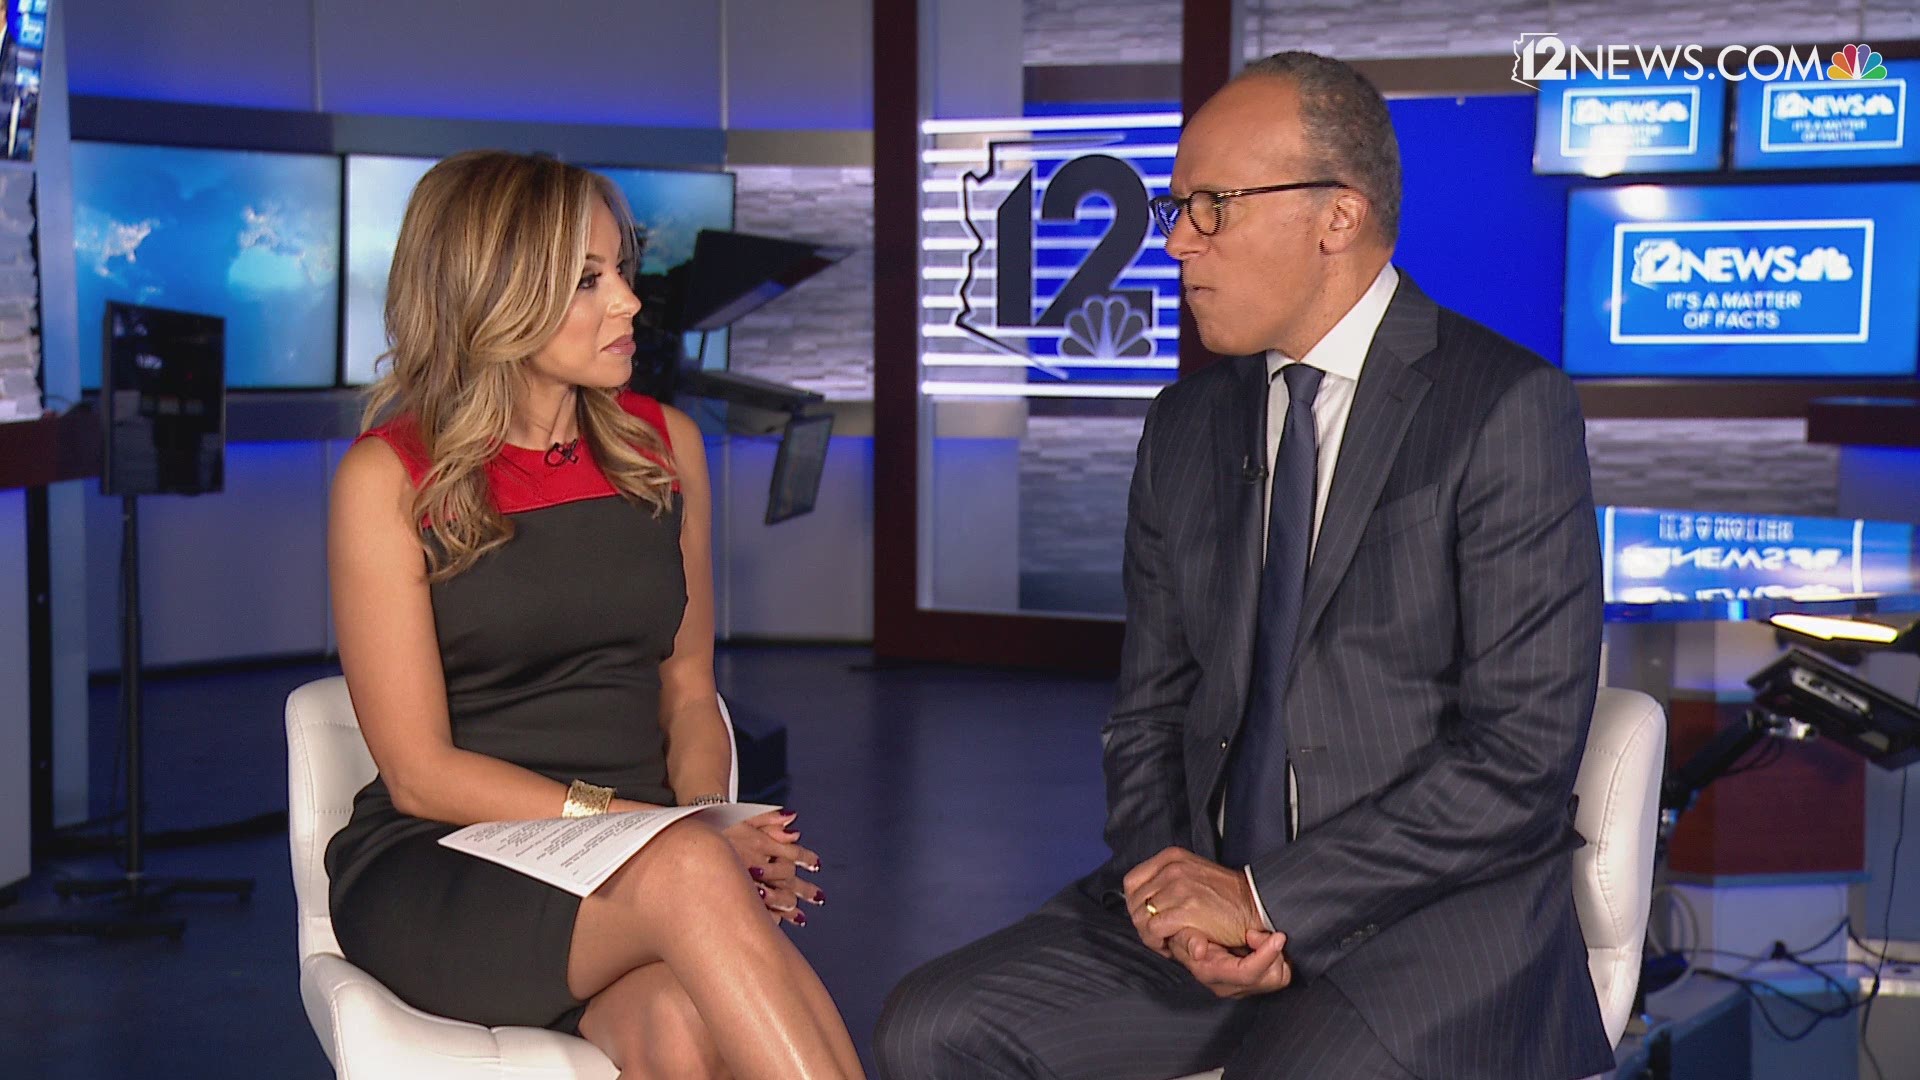 NBC Nightly News anchor Lester Holt urges people to check the news they are watching and reading. He also talks about his reporting on the criminal justice system.